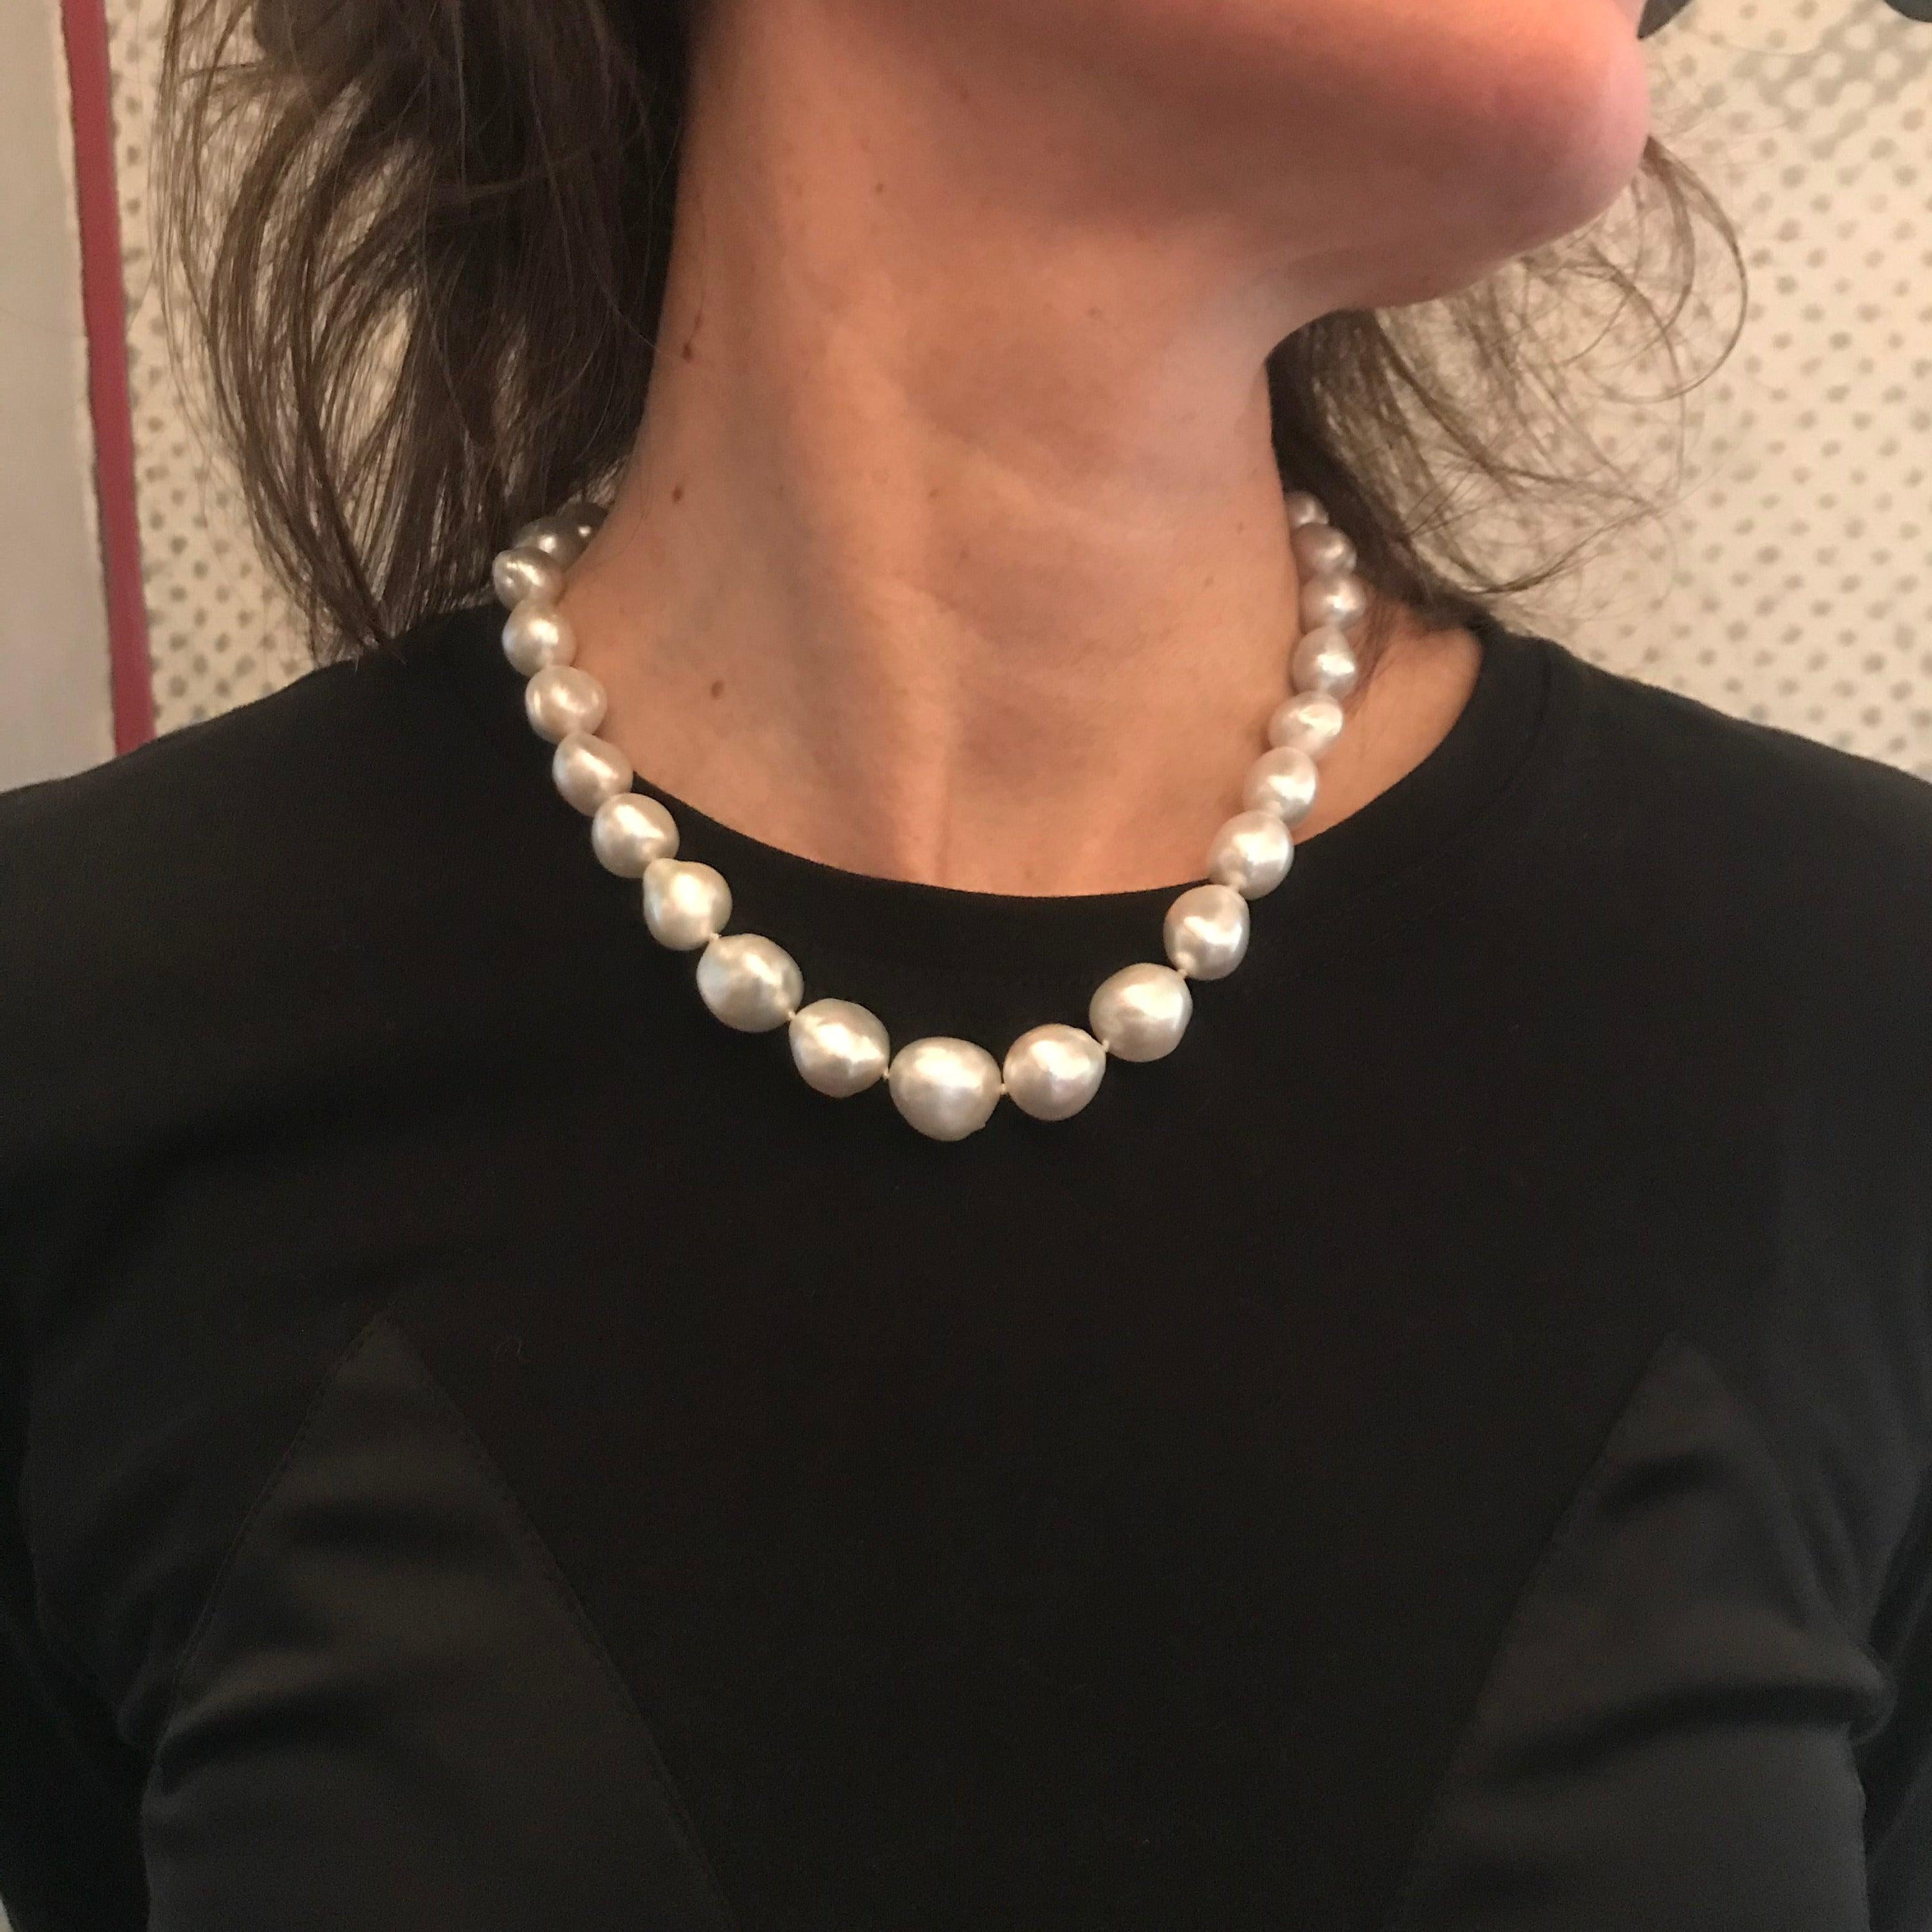 Everyone should have one pearl necklace in his jewelry box, especially when it comes along with noble shiny southsea baroque pearls with a 22k yellow gold clasp topped off with Colleen B. Rosenblat’s logo.